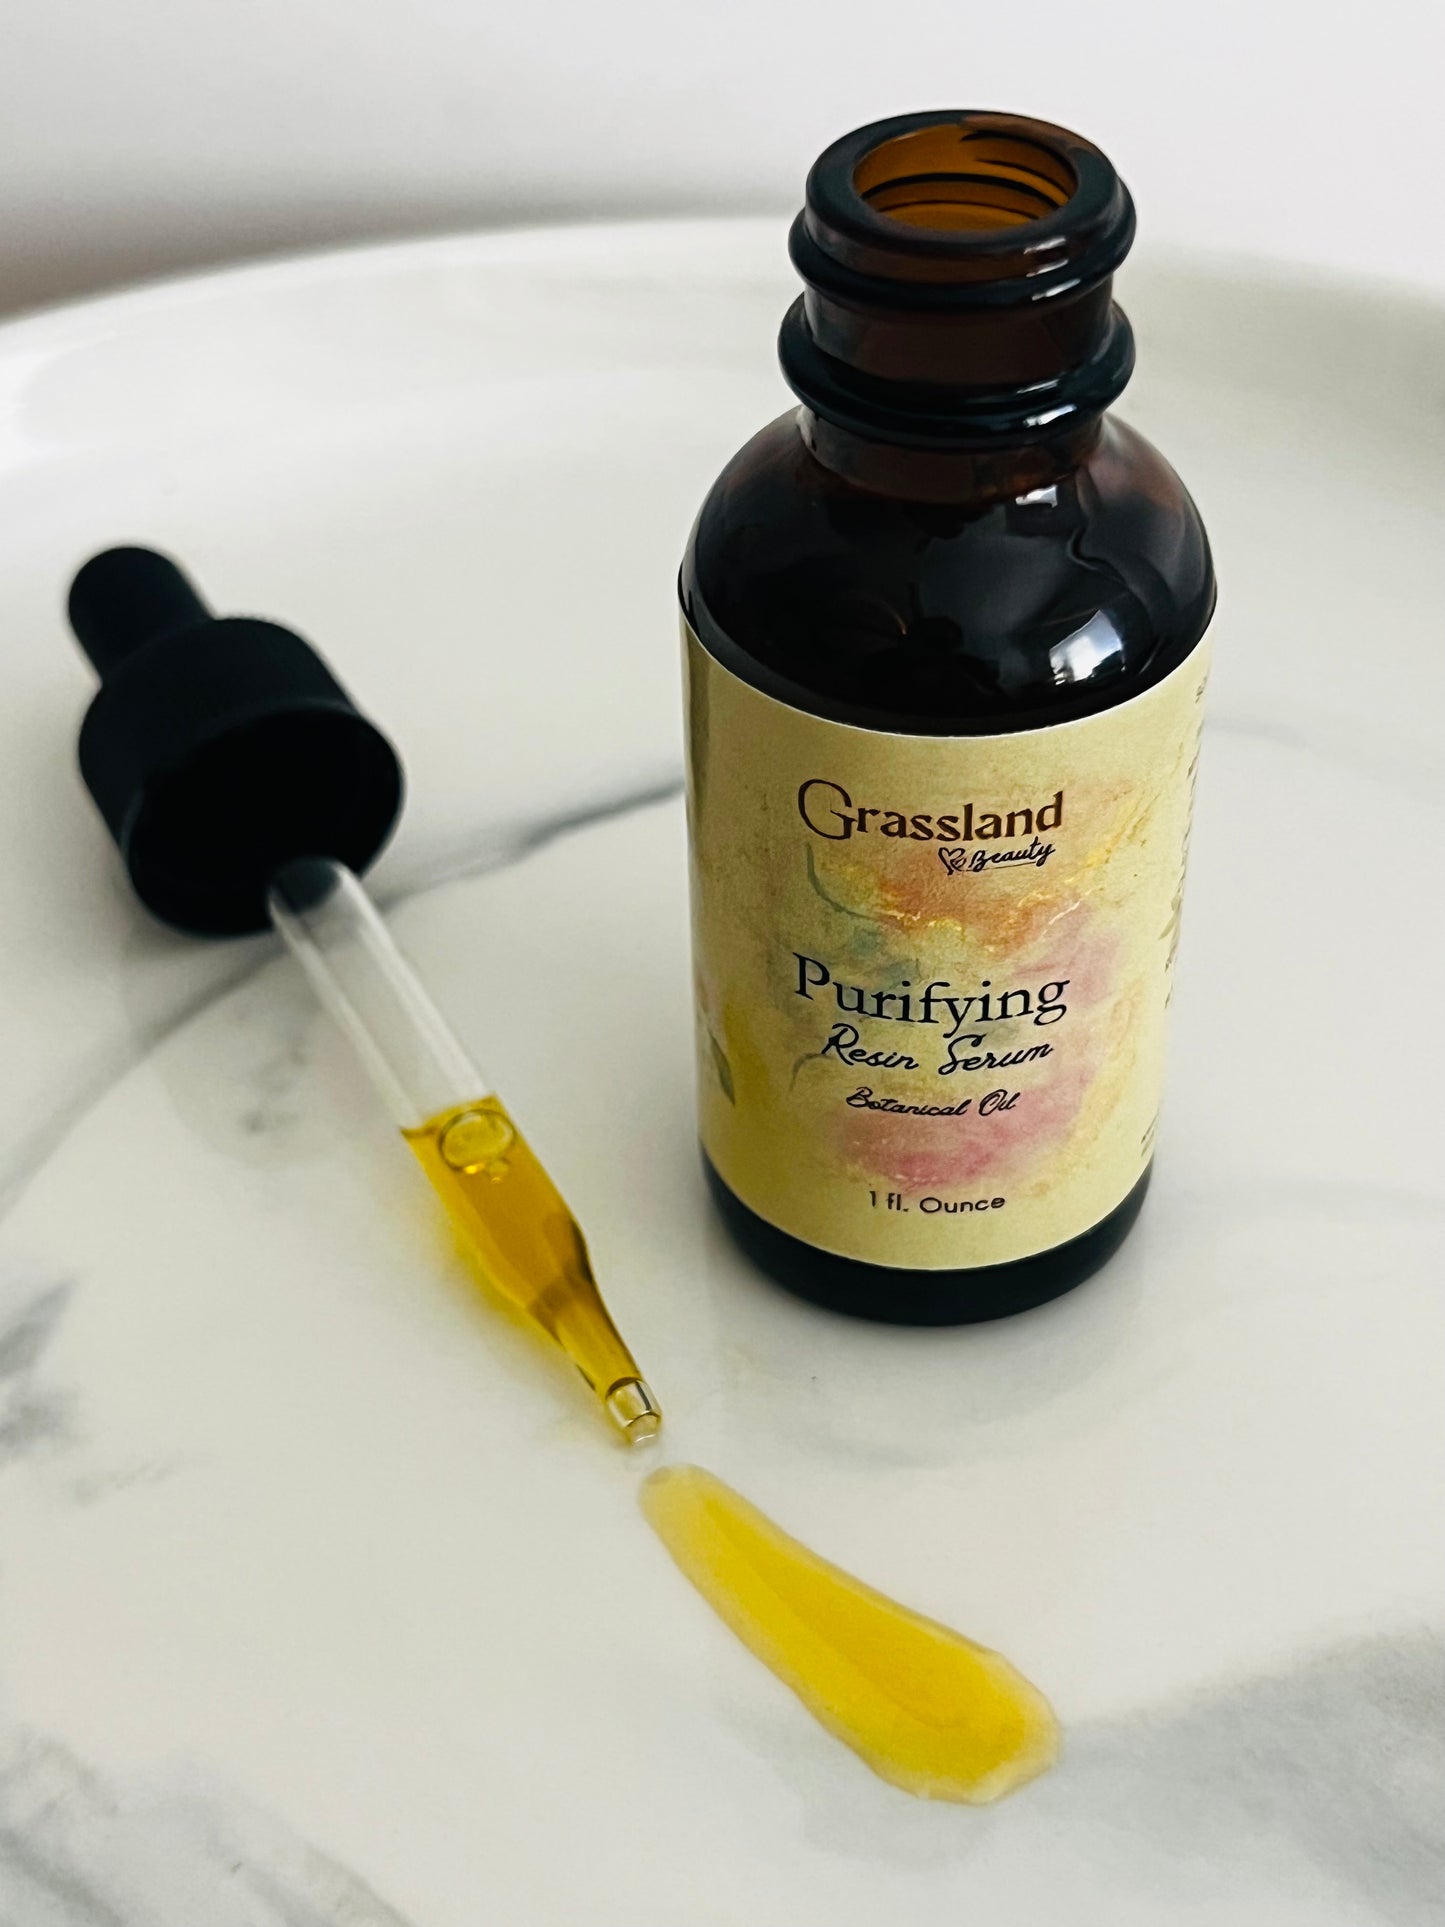 Purifying Resin Serum For Acne Prone Skin